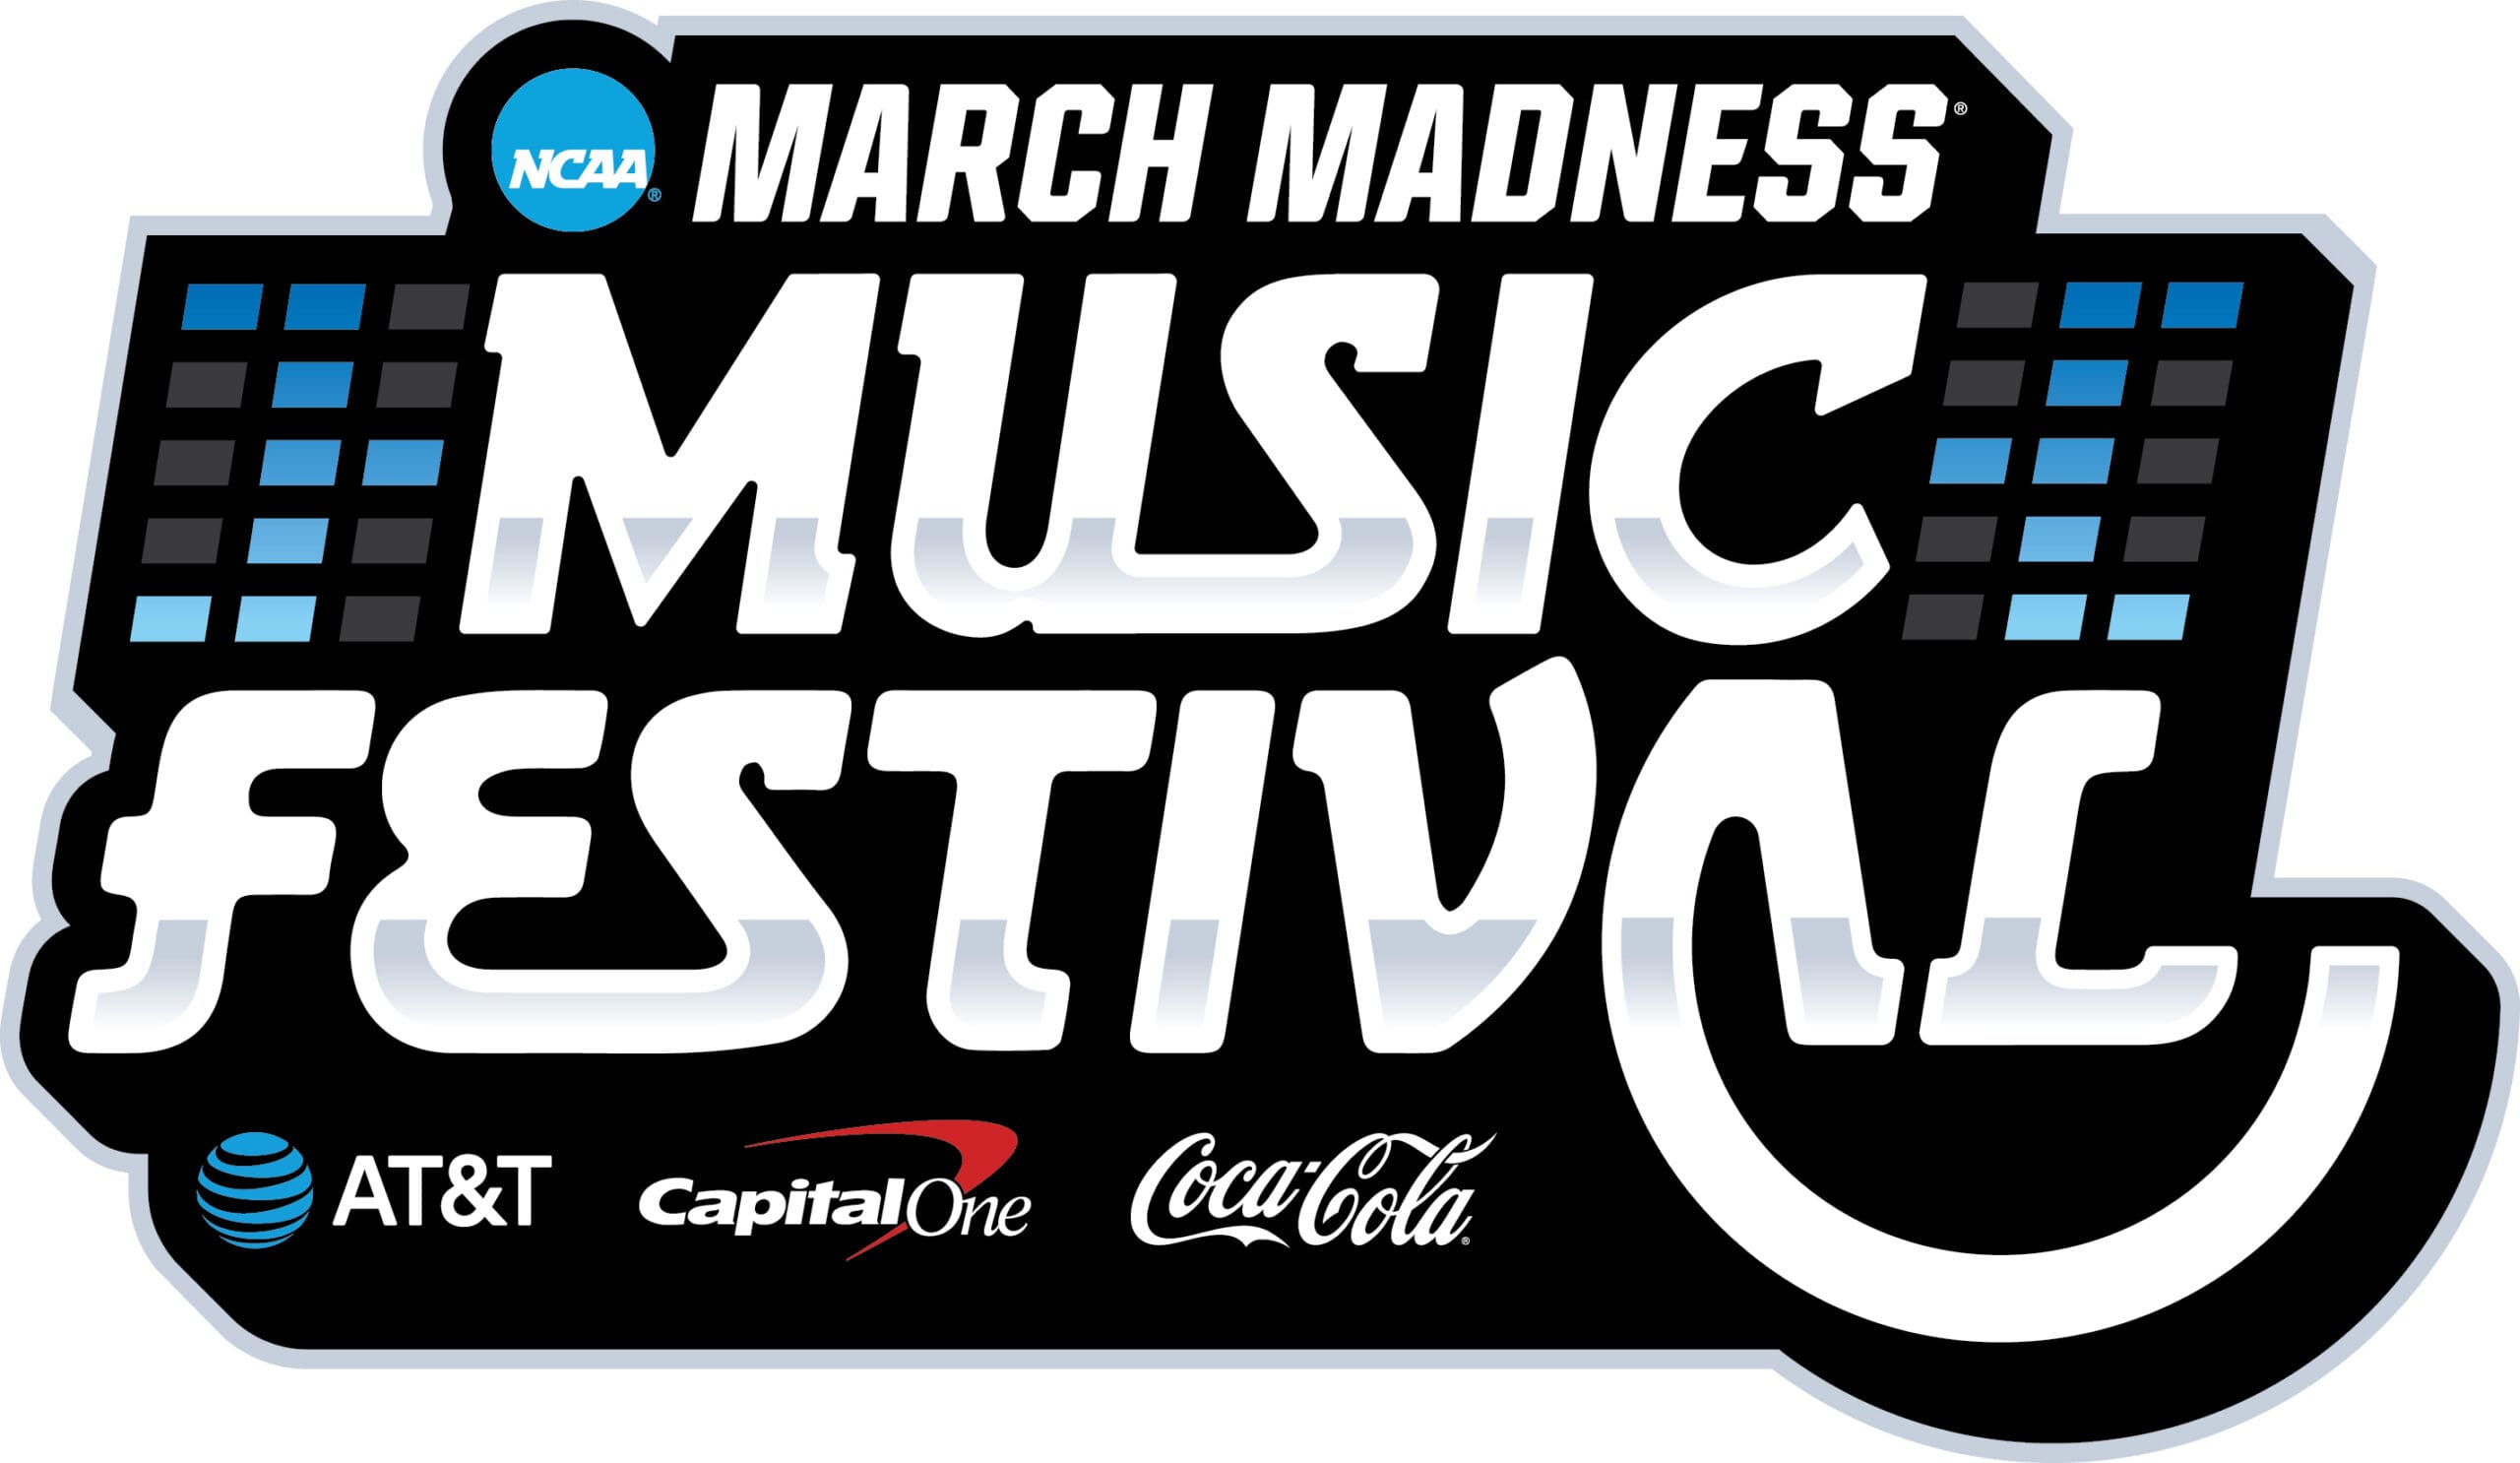 March Madness Music Festival® Presented by AT&T, Capital One and Coca-Cola